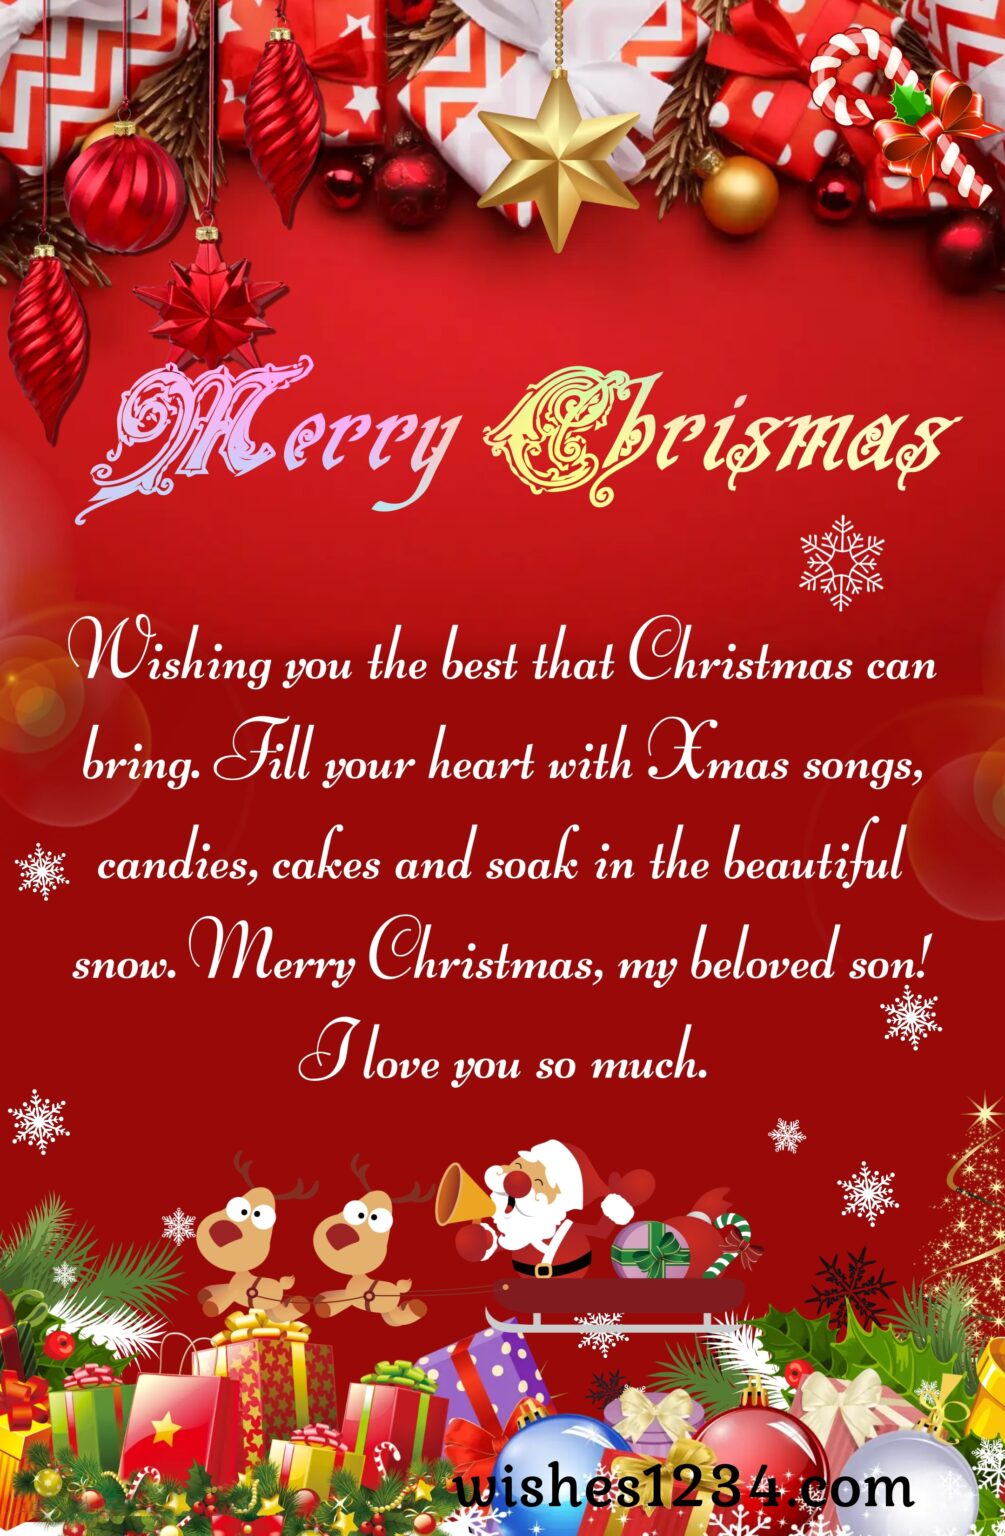 Merry Christmas Wishes, Messages and Greetings with Images